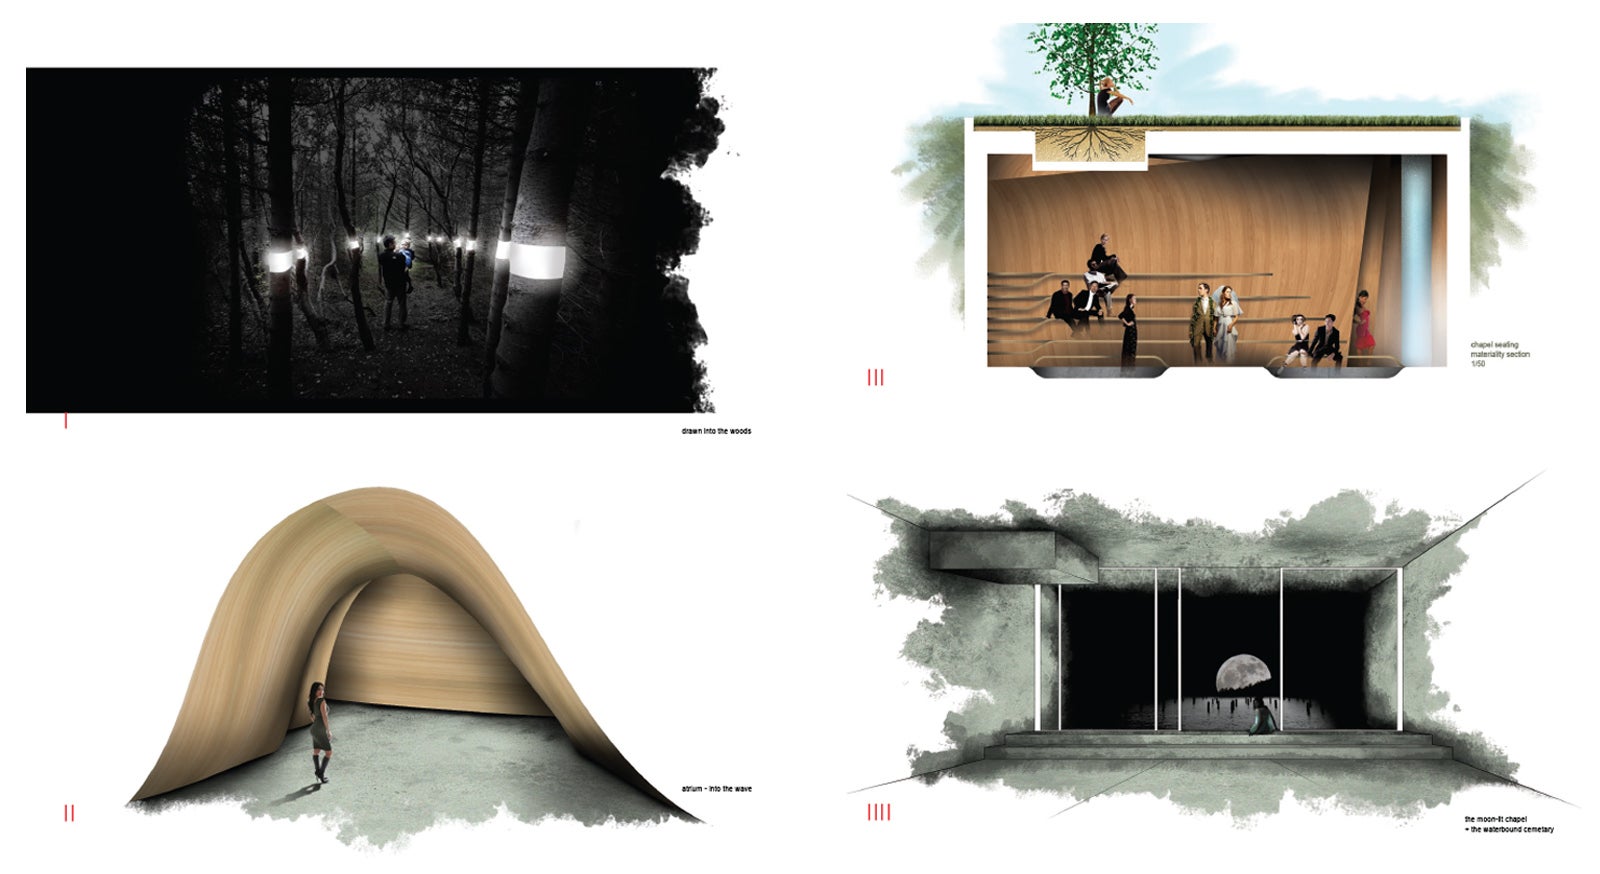 A presentation panel extract showcasing several night, day, and interior section renders of the building and surroundings.